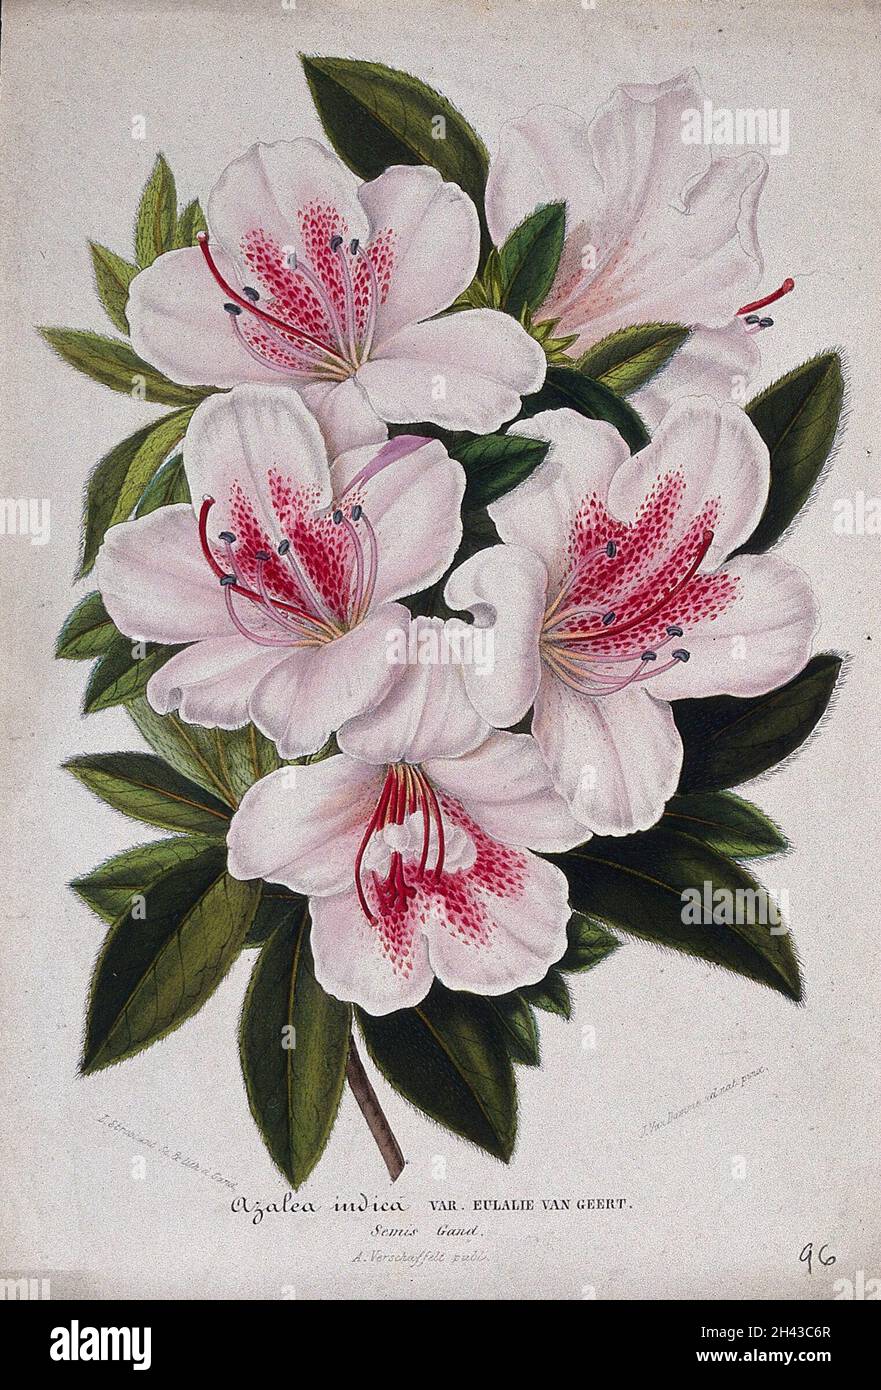 An Indian azalea (Rhododendron cultivar): flowering stem. Chromolithograph by L. Stroobant, c. 1863, after J. Vandamme. Stock Photo